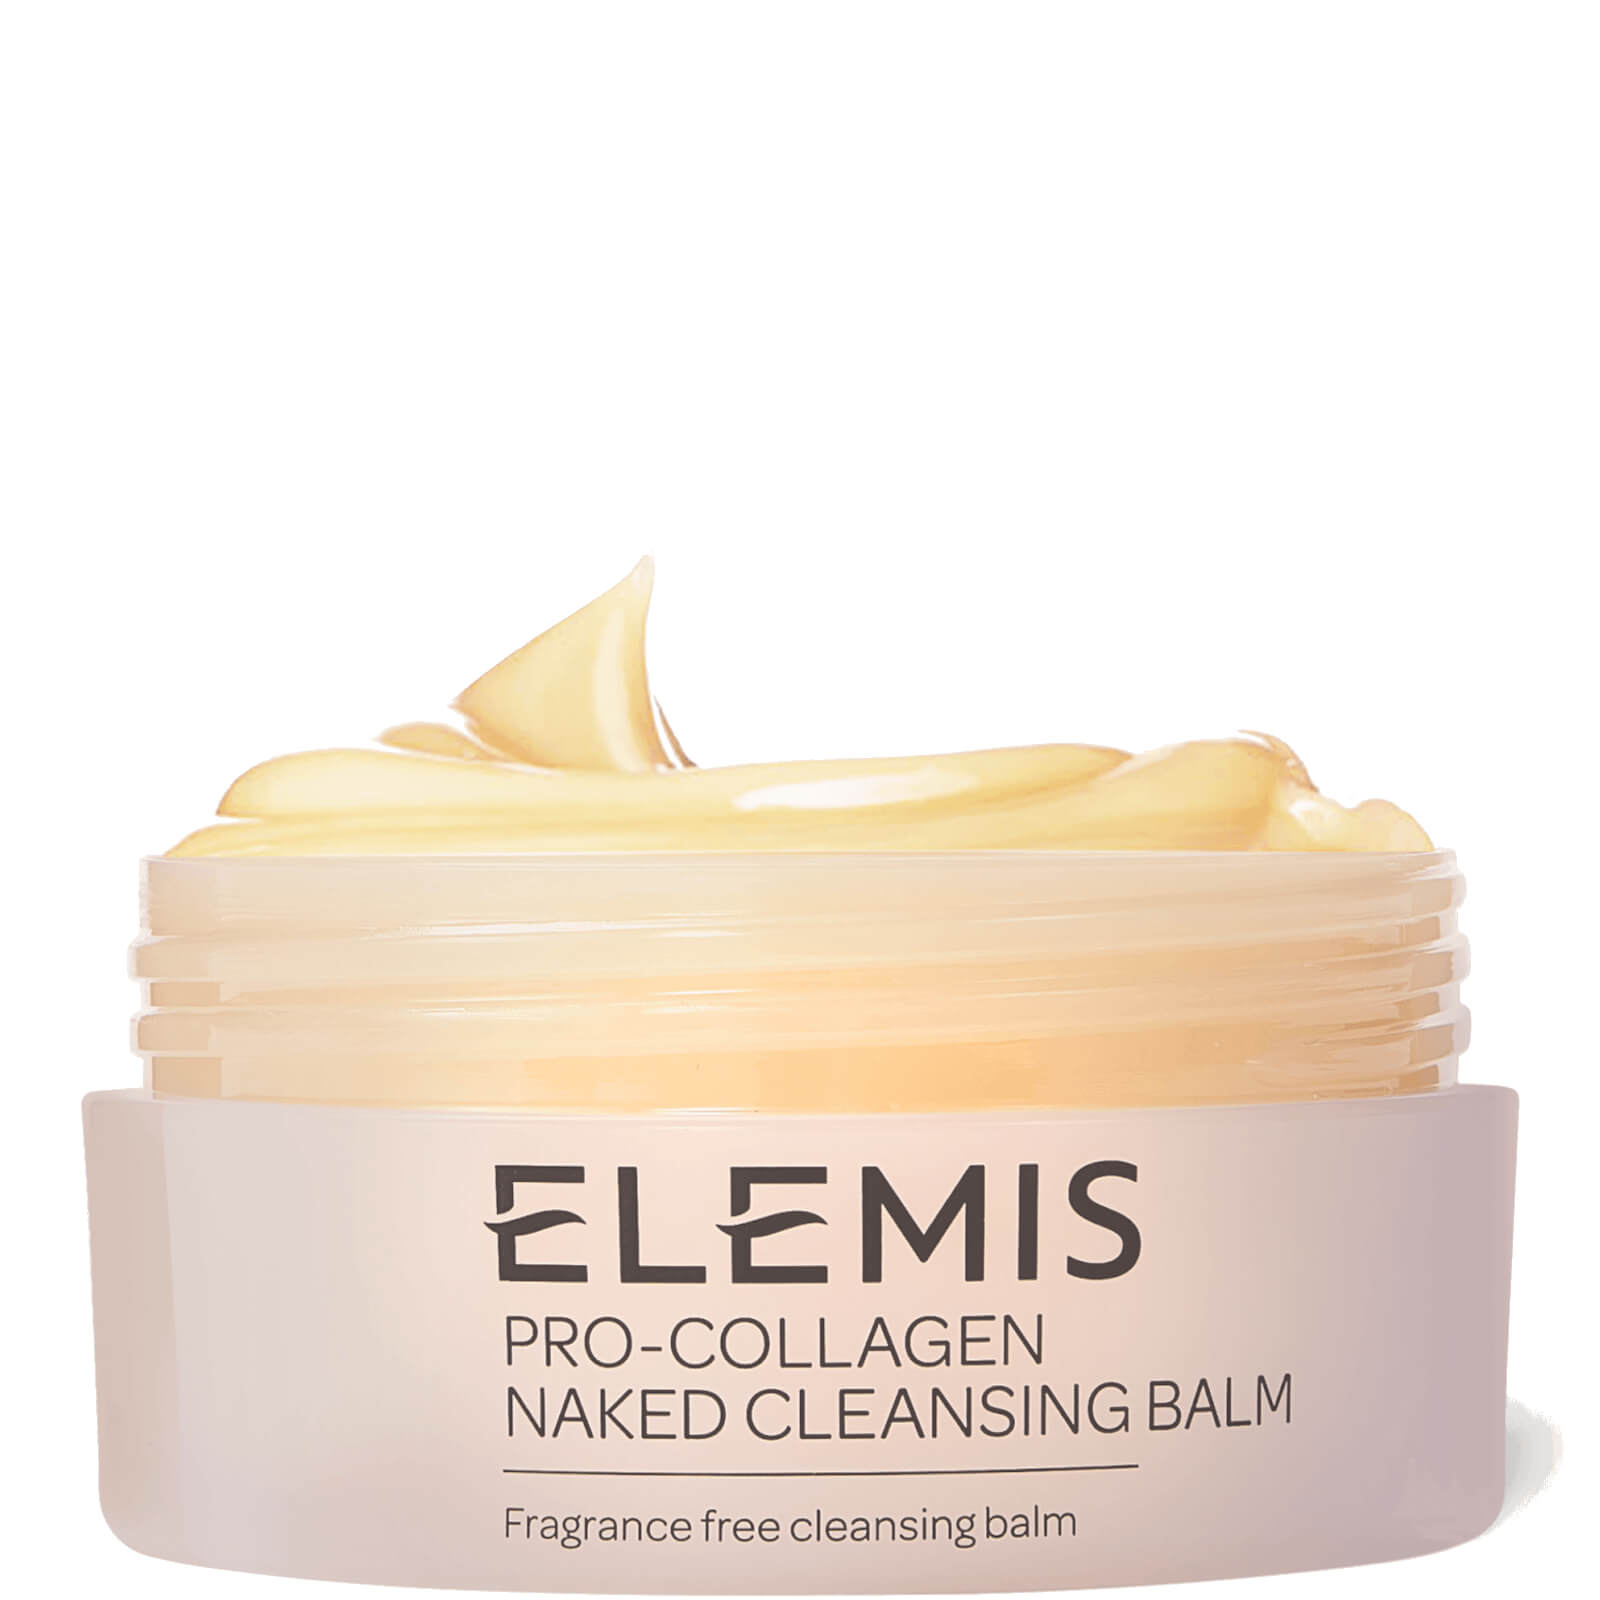 Pro-Collagen Naked Cleansing Balm 100g